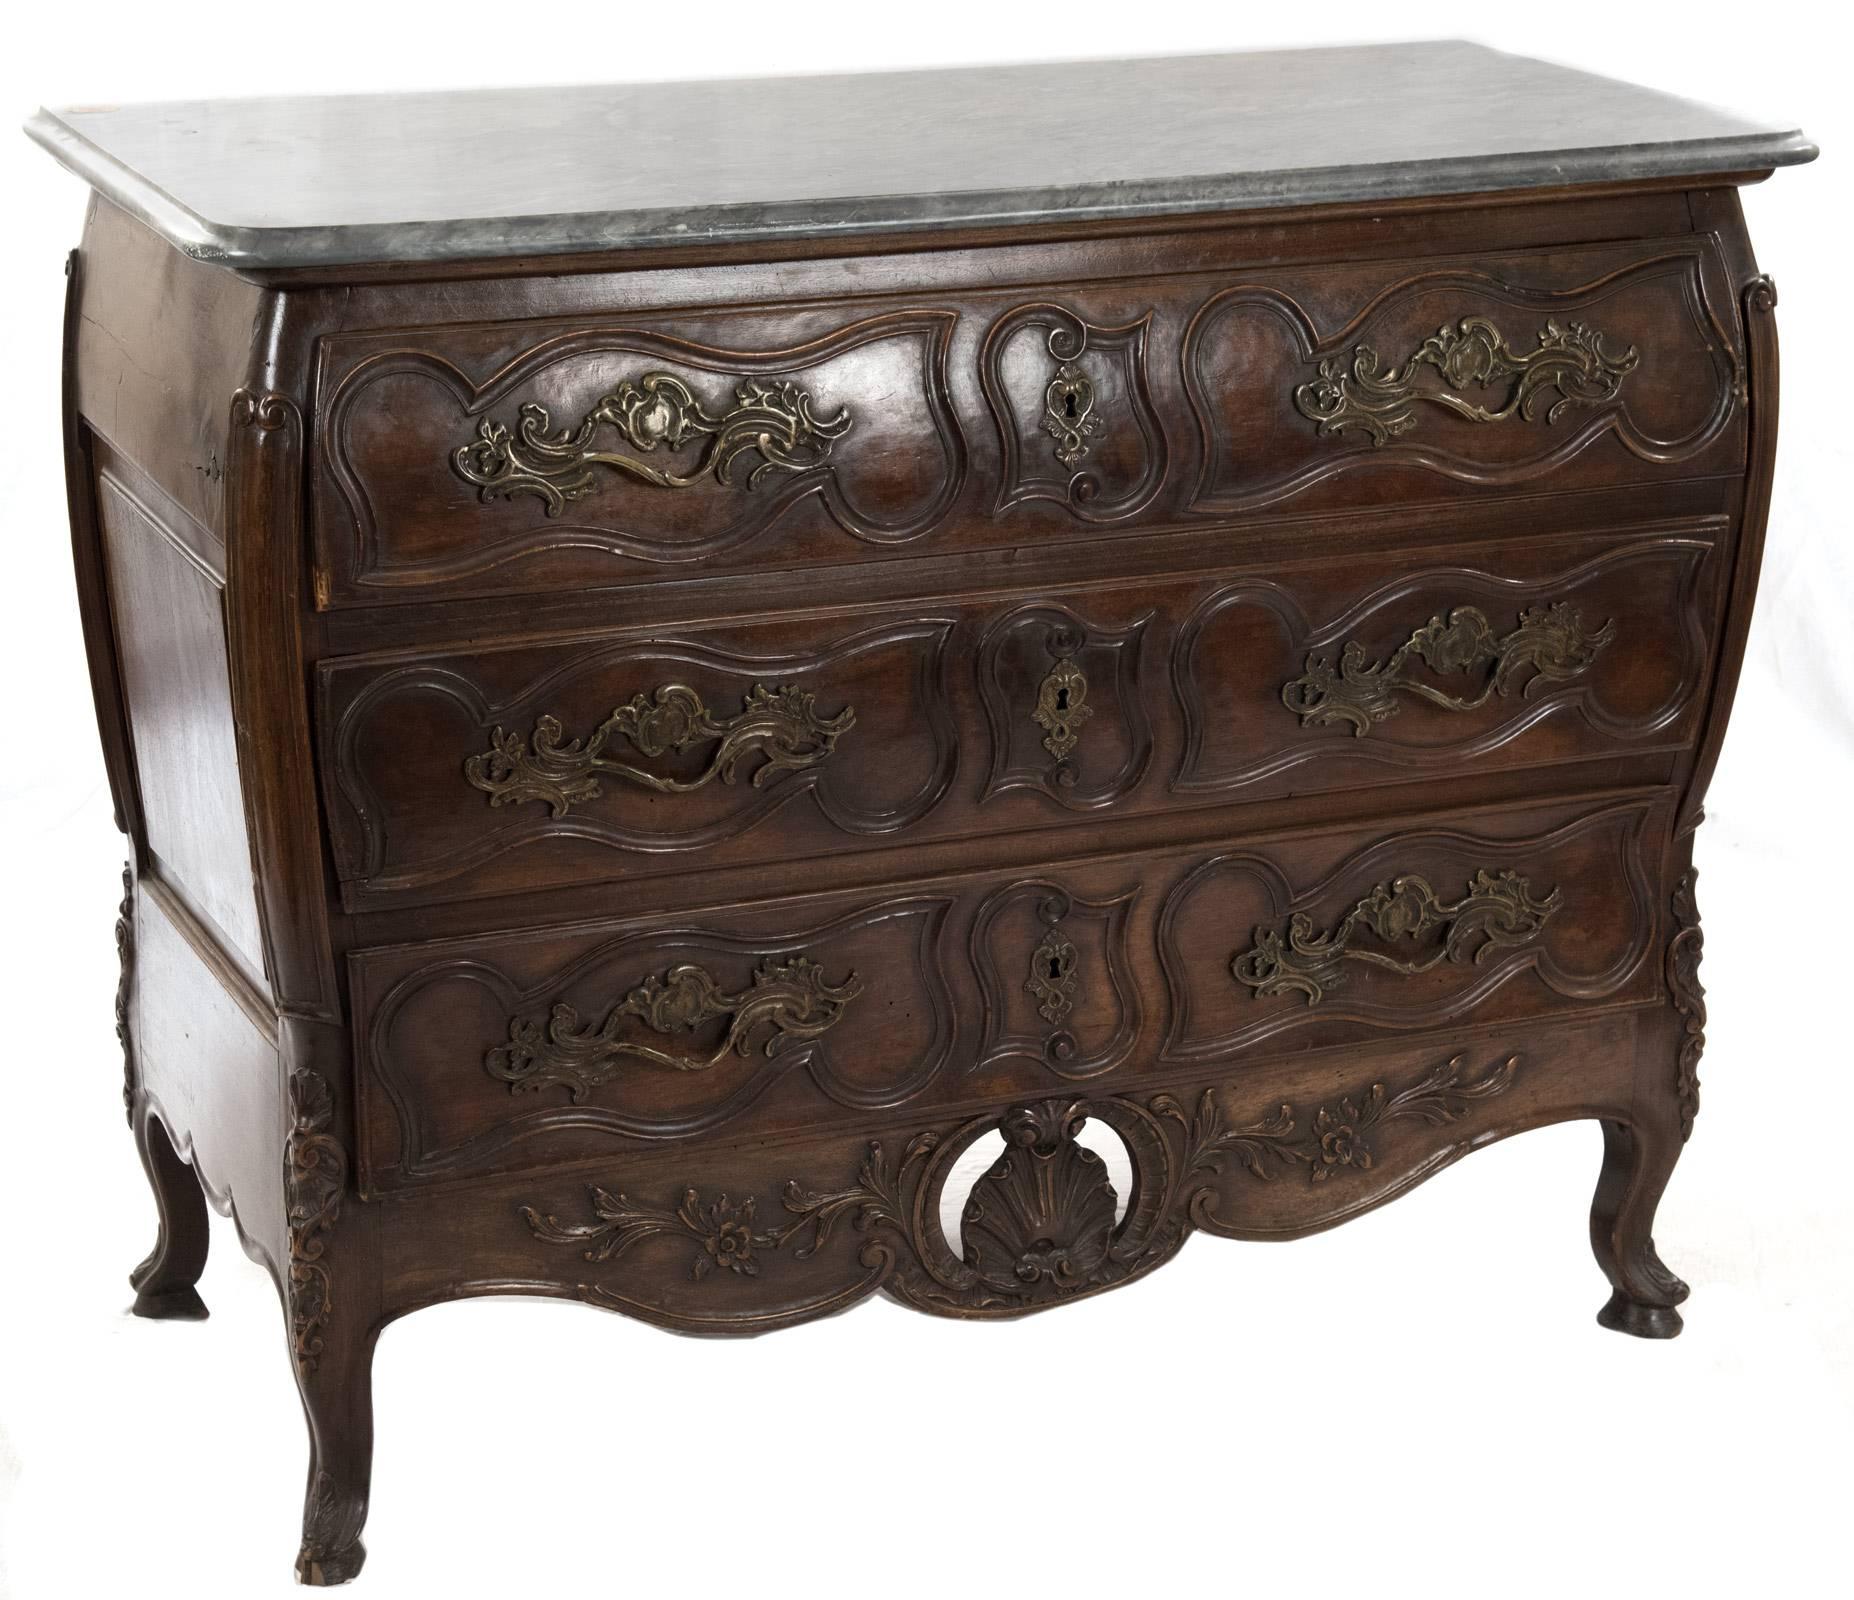 A finely carved late eighteenth century walnut commode in the French provincial Louis XV style particular to Nimes. A rectangular grey marble top sits above a commode of bombe form with carved canted corners flanking three long drawers, each